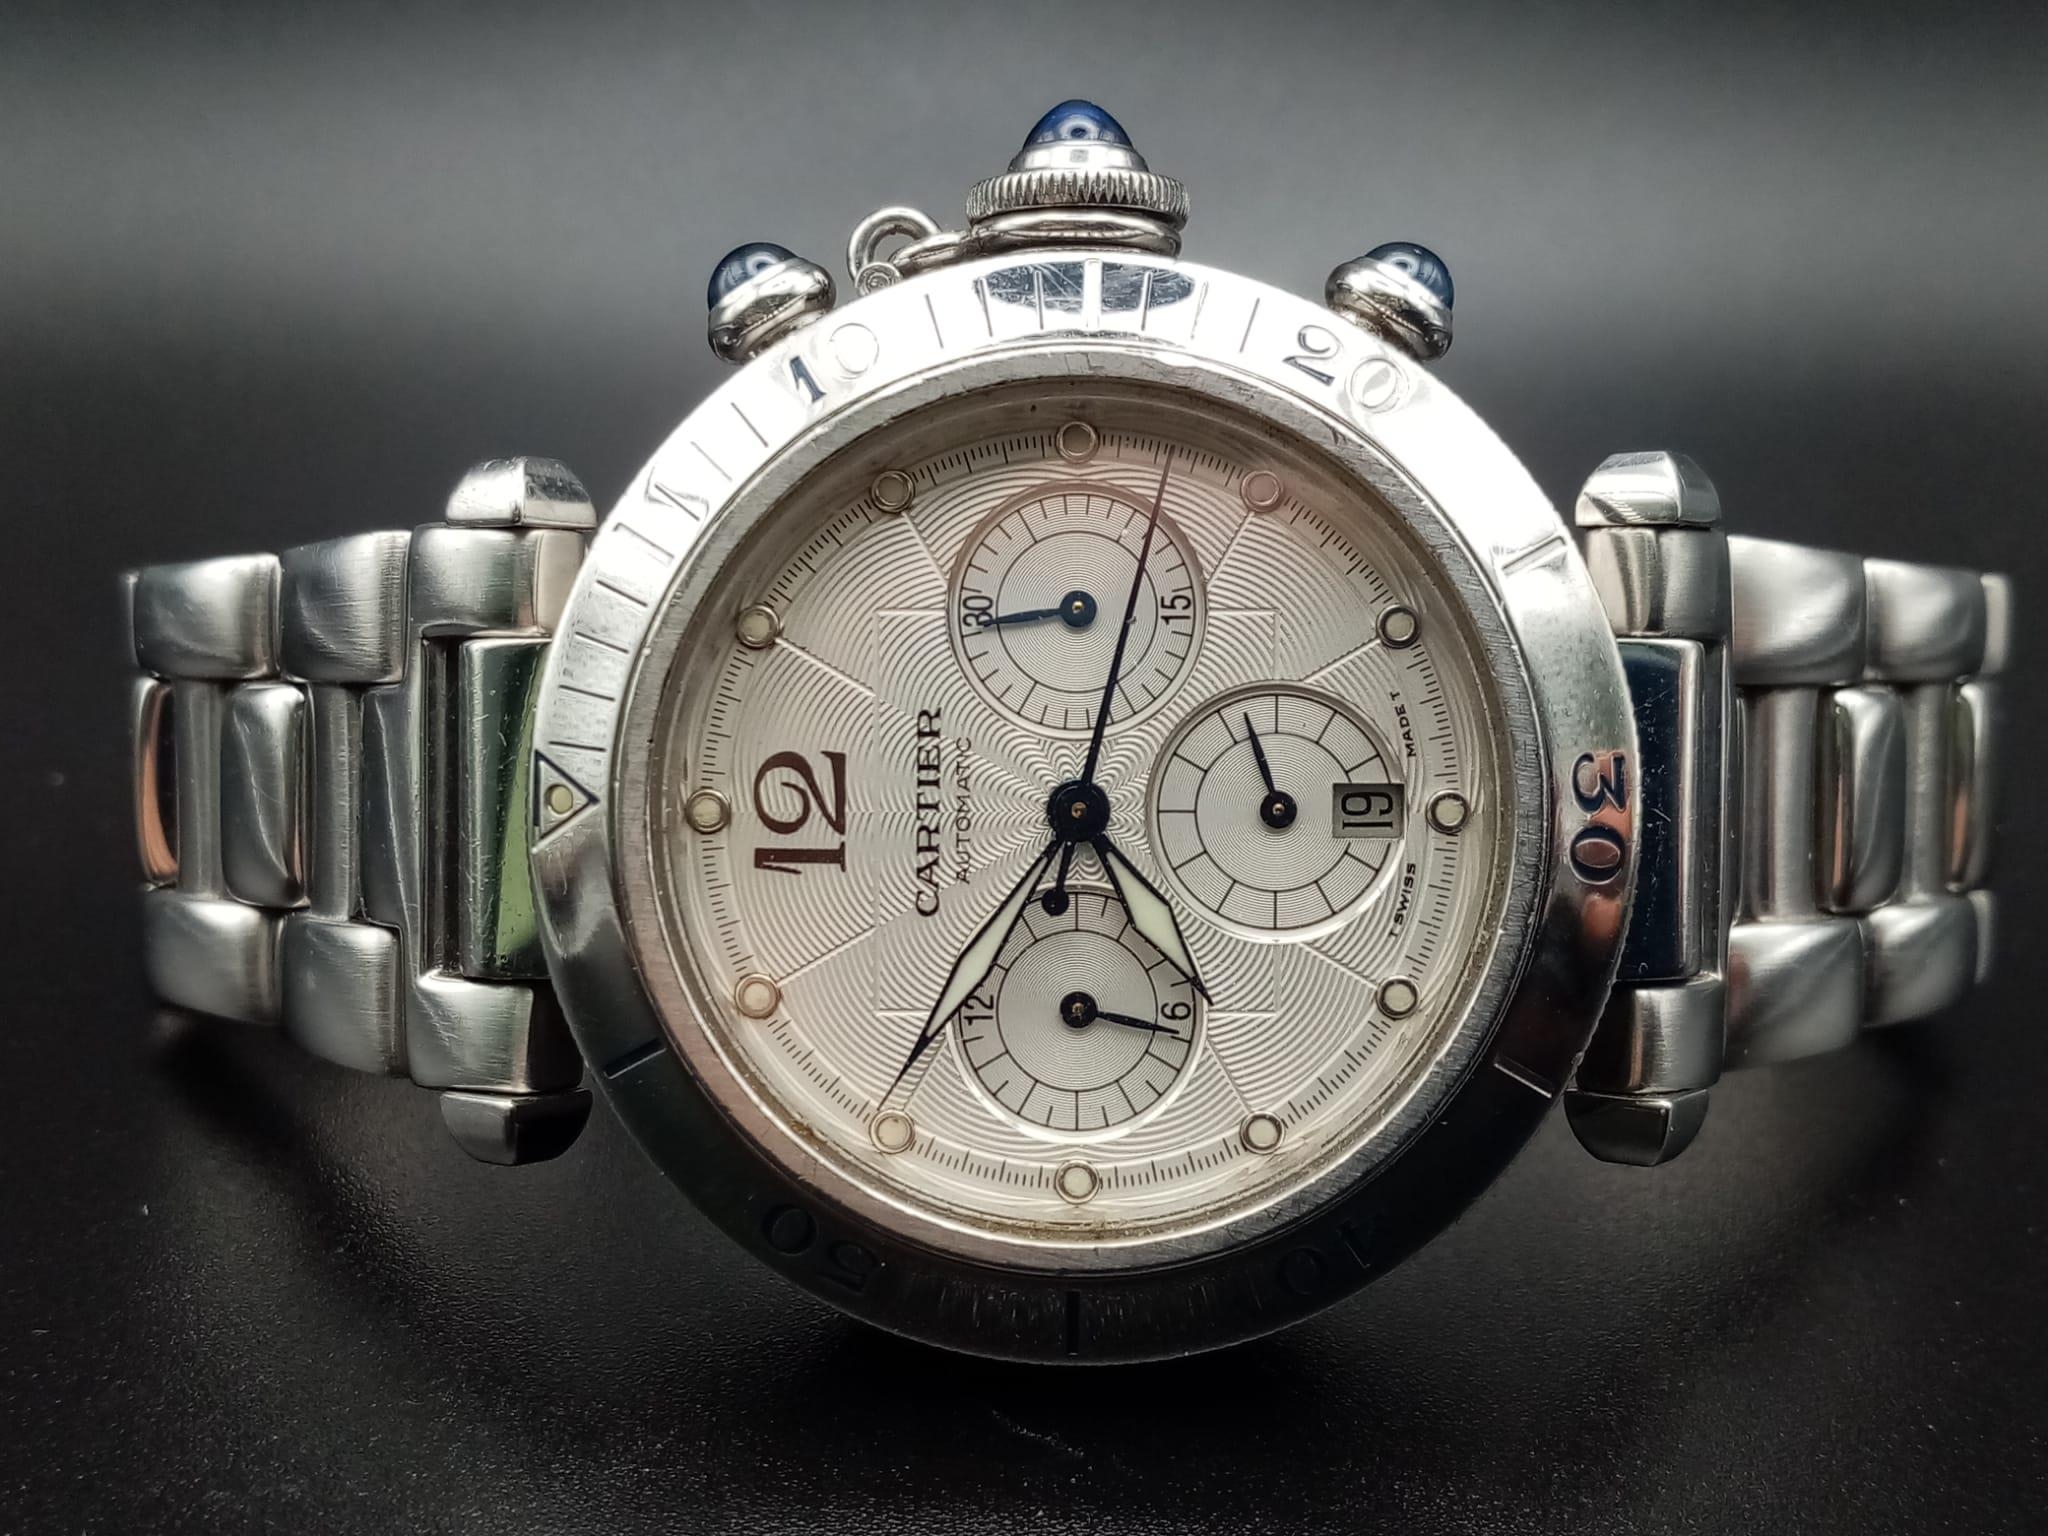 A Cartier Pasha Automatic Gents Chronograph Watch. Stainless steel strap and case - 38mm. White dial - Image 4 of 10